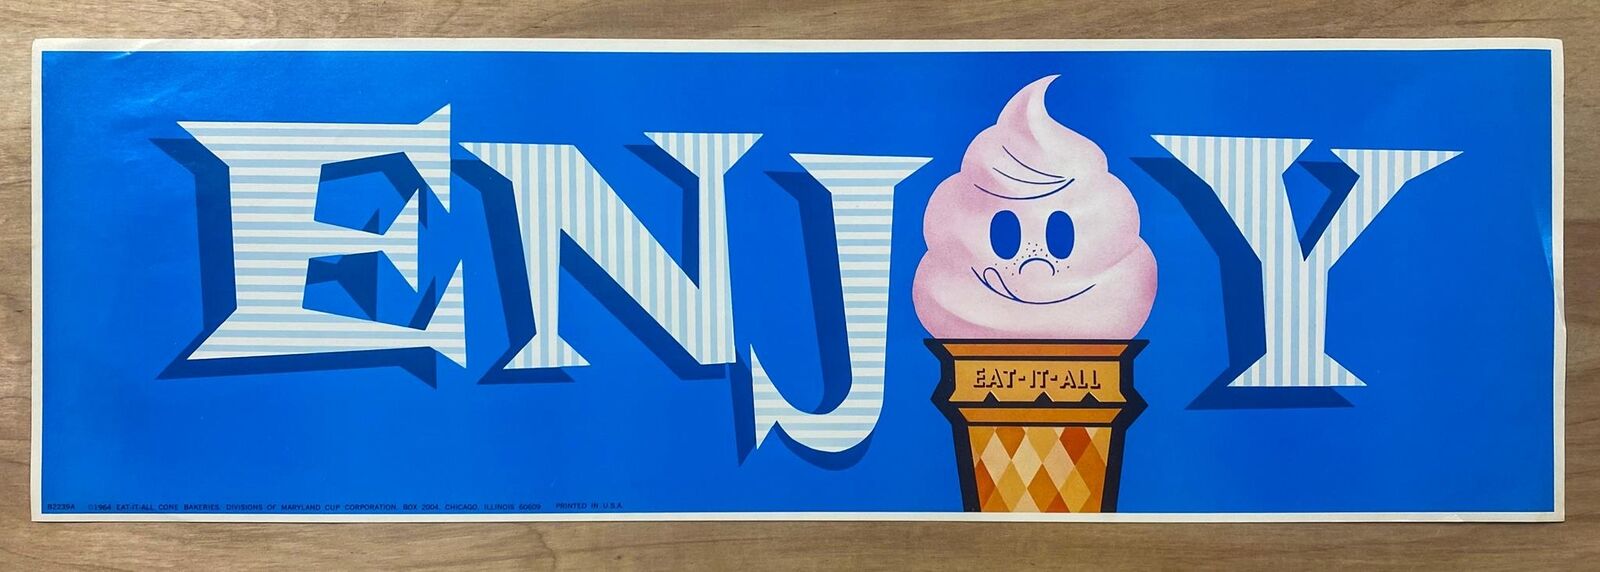 1964 ENJOY Eat-It-All Ice Cream Cone Bakeries Paper Sign Atomic Age Vintage NOS